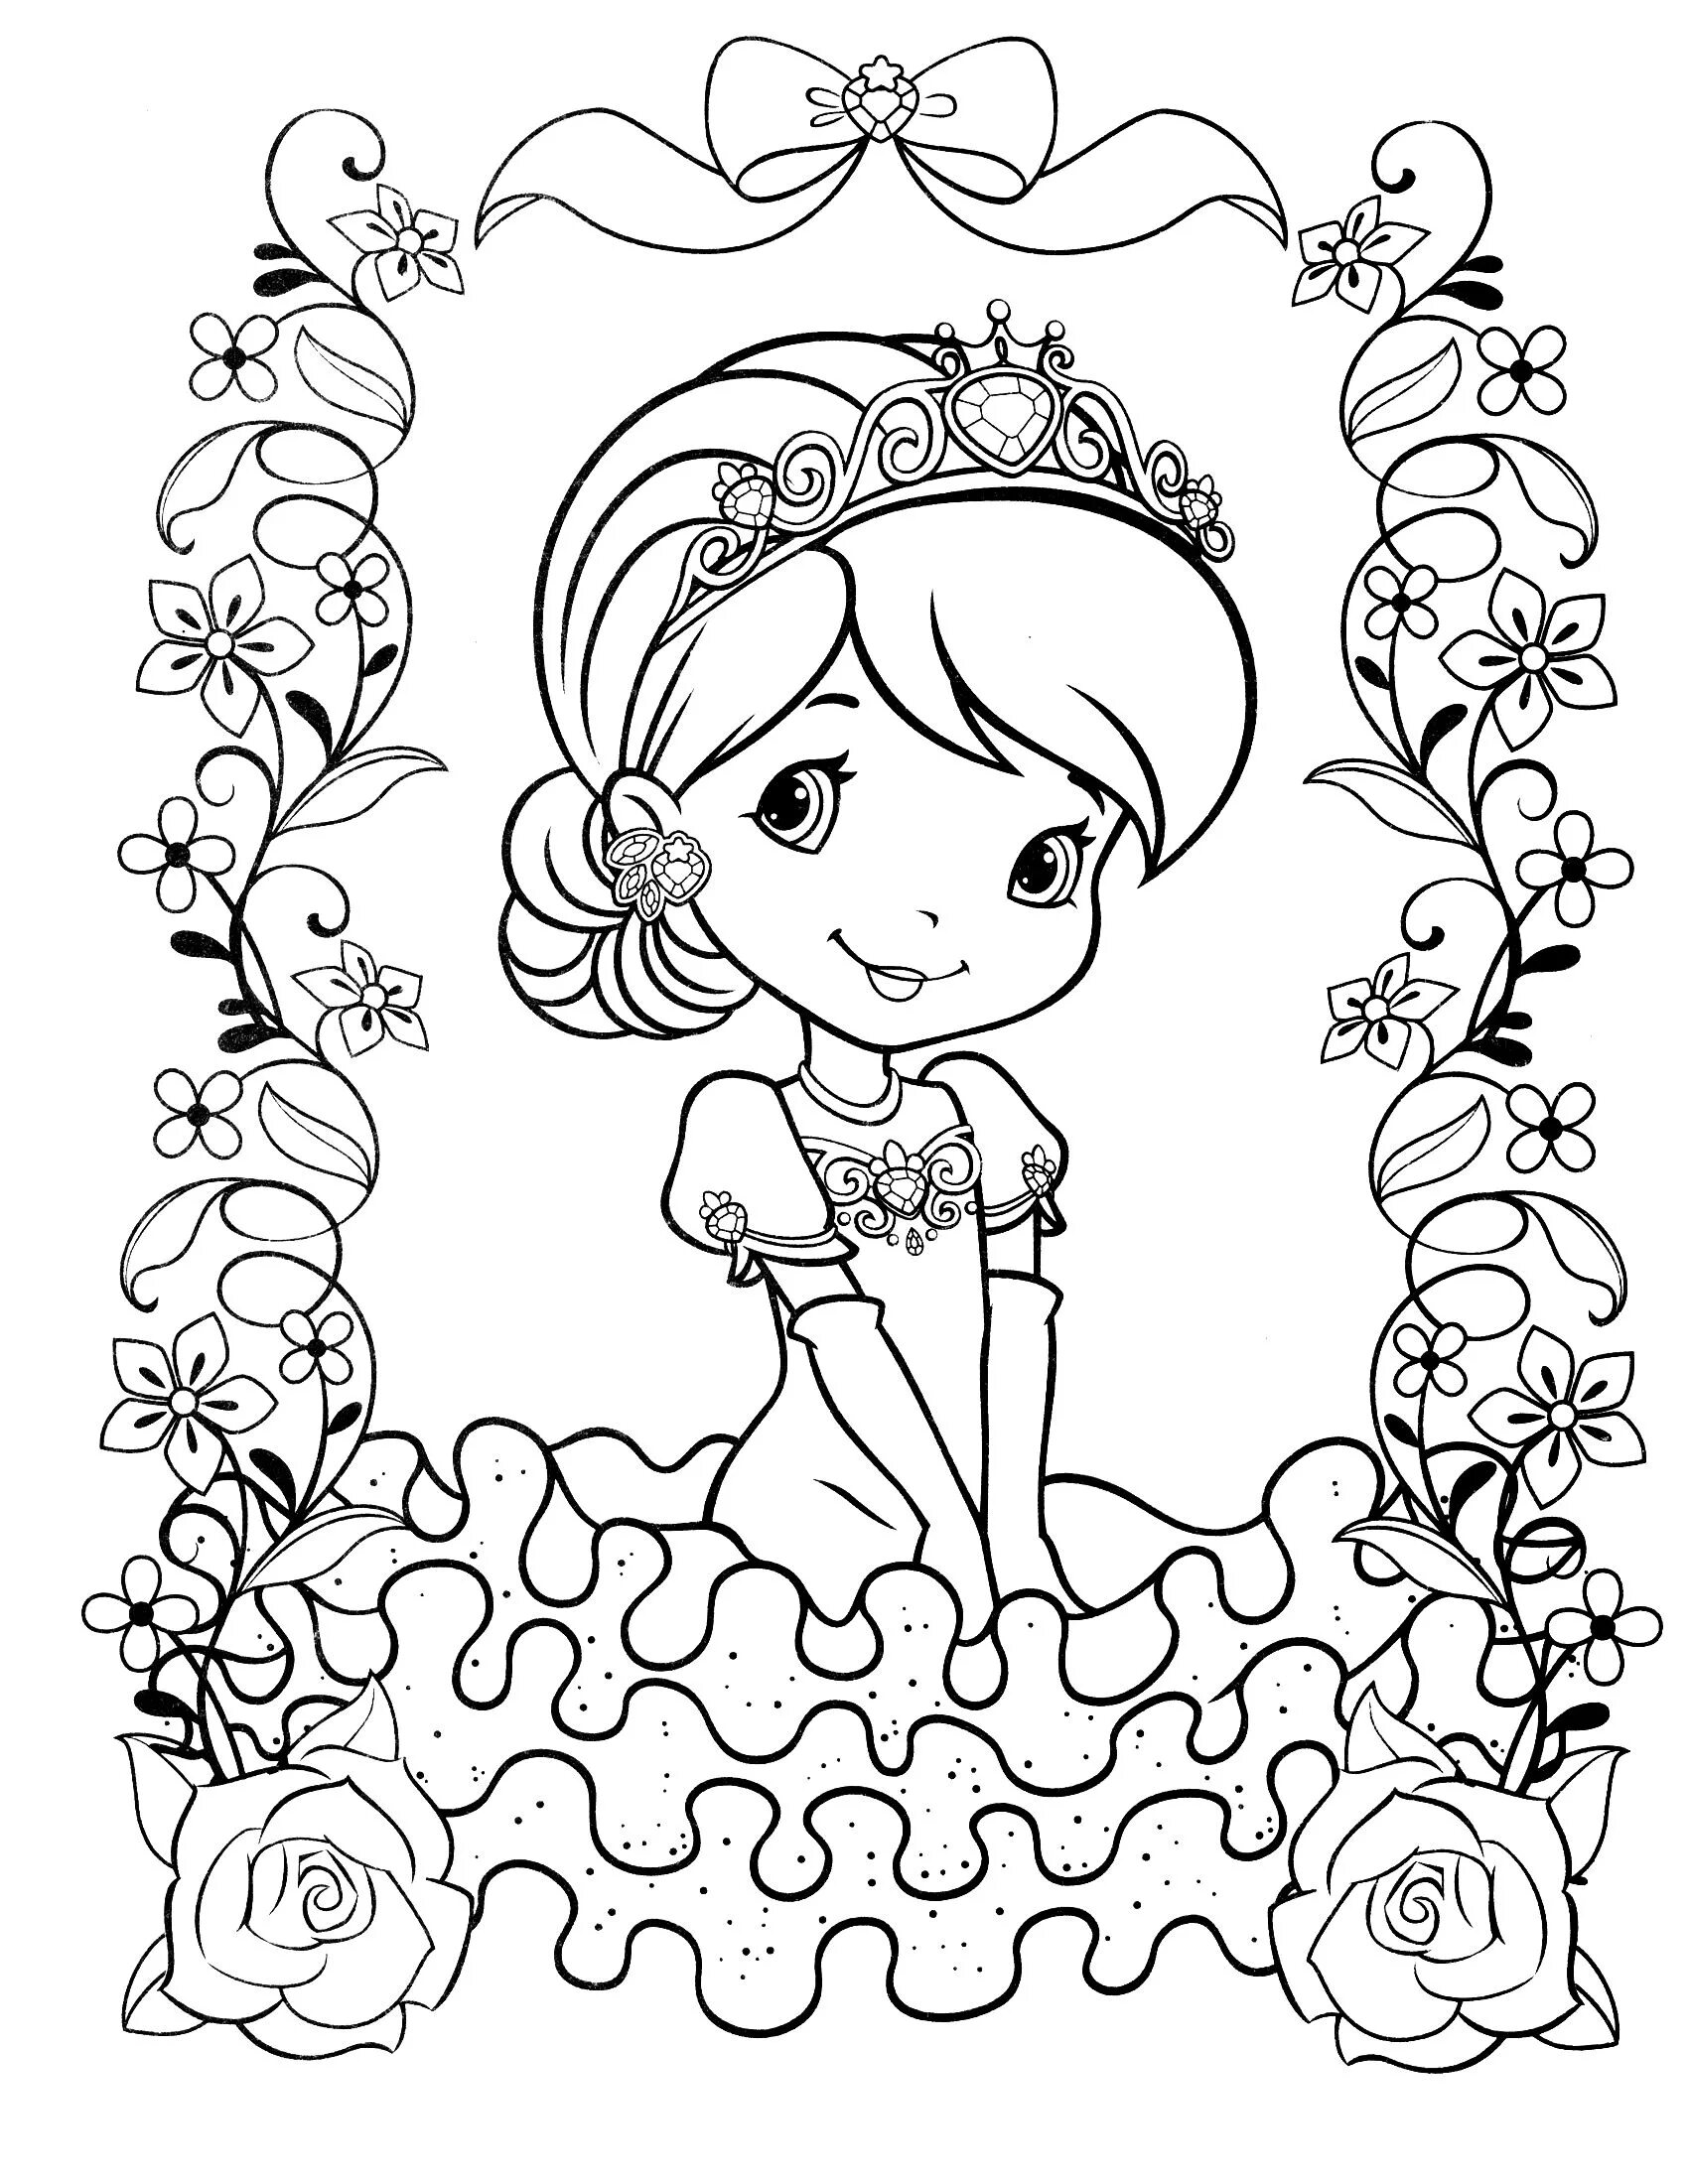 Fantastic coloring for girls stencil